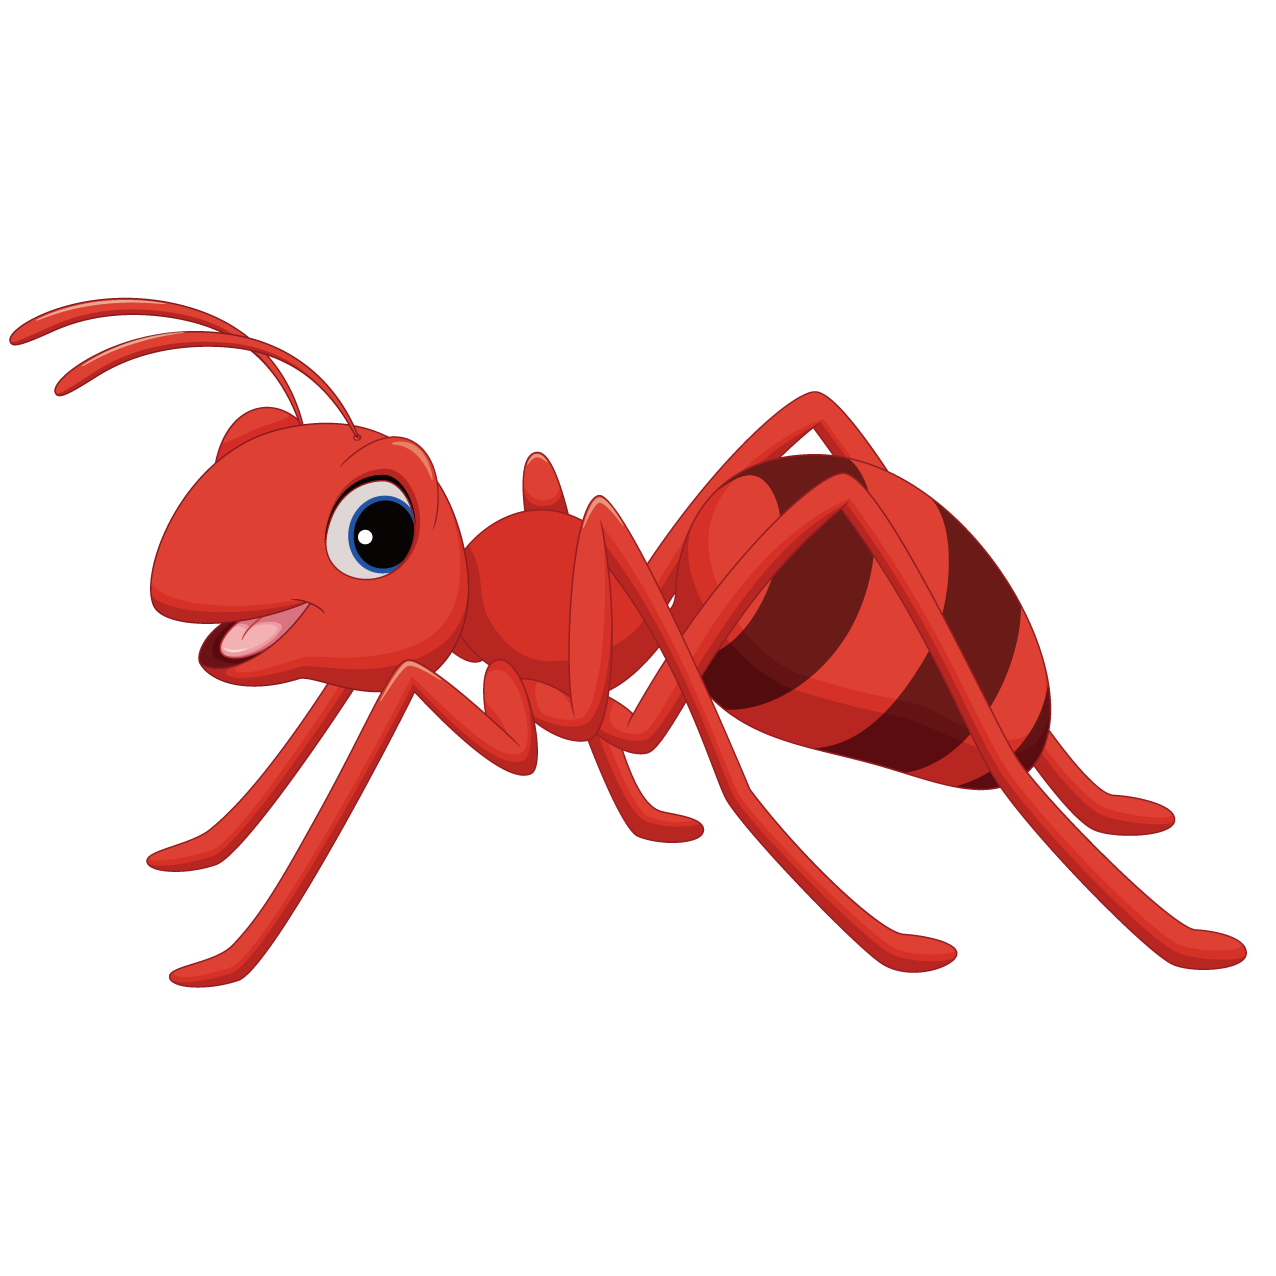 Ant clipart red ant. Cartoon clip art ants